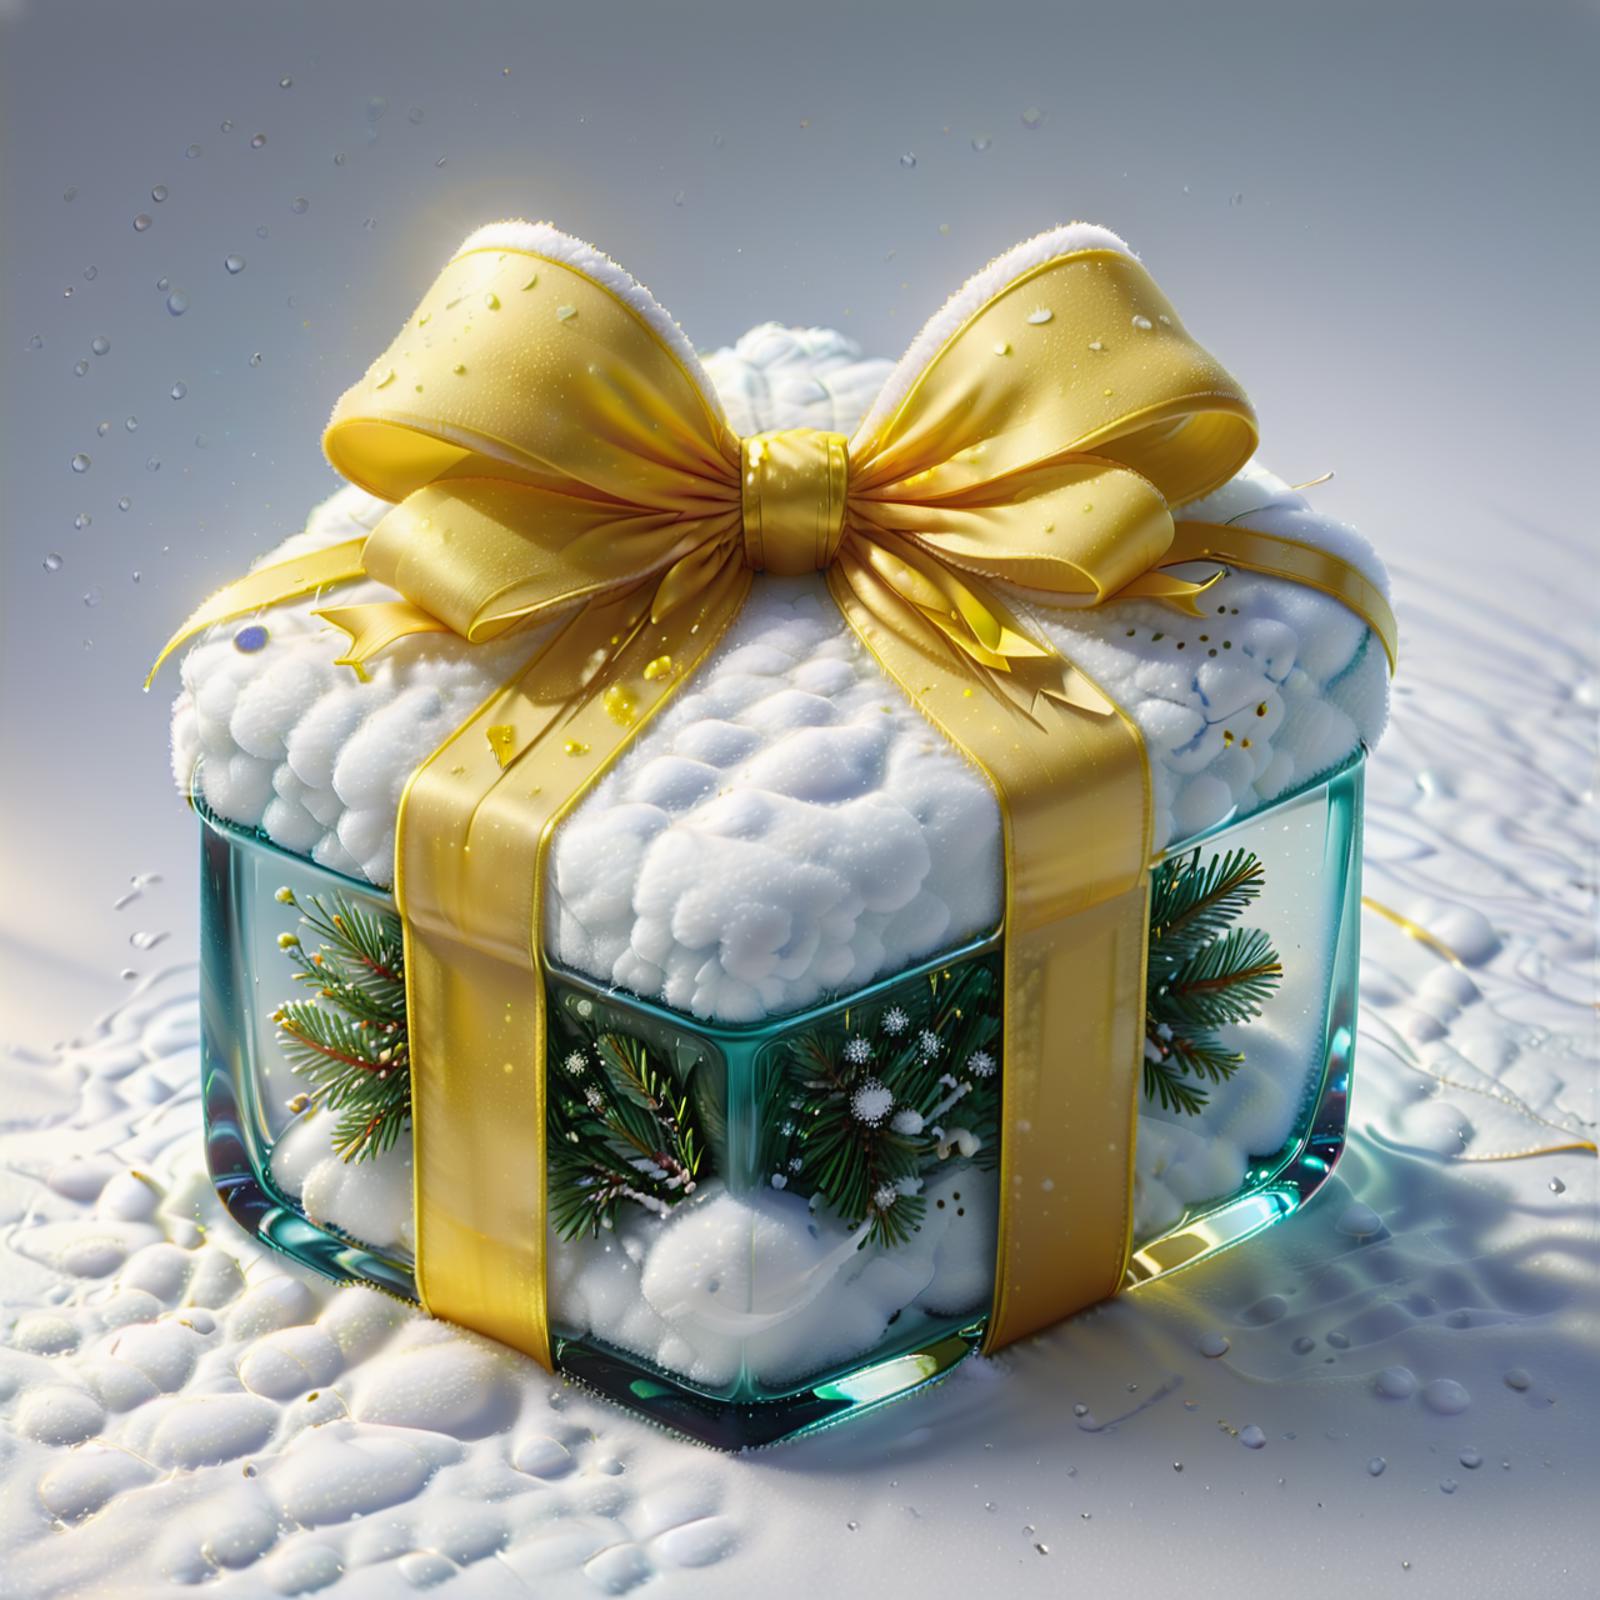 A Snowy Gift Box with a Yellow Bow and Snowflakes.